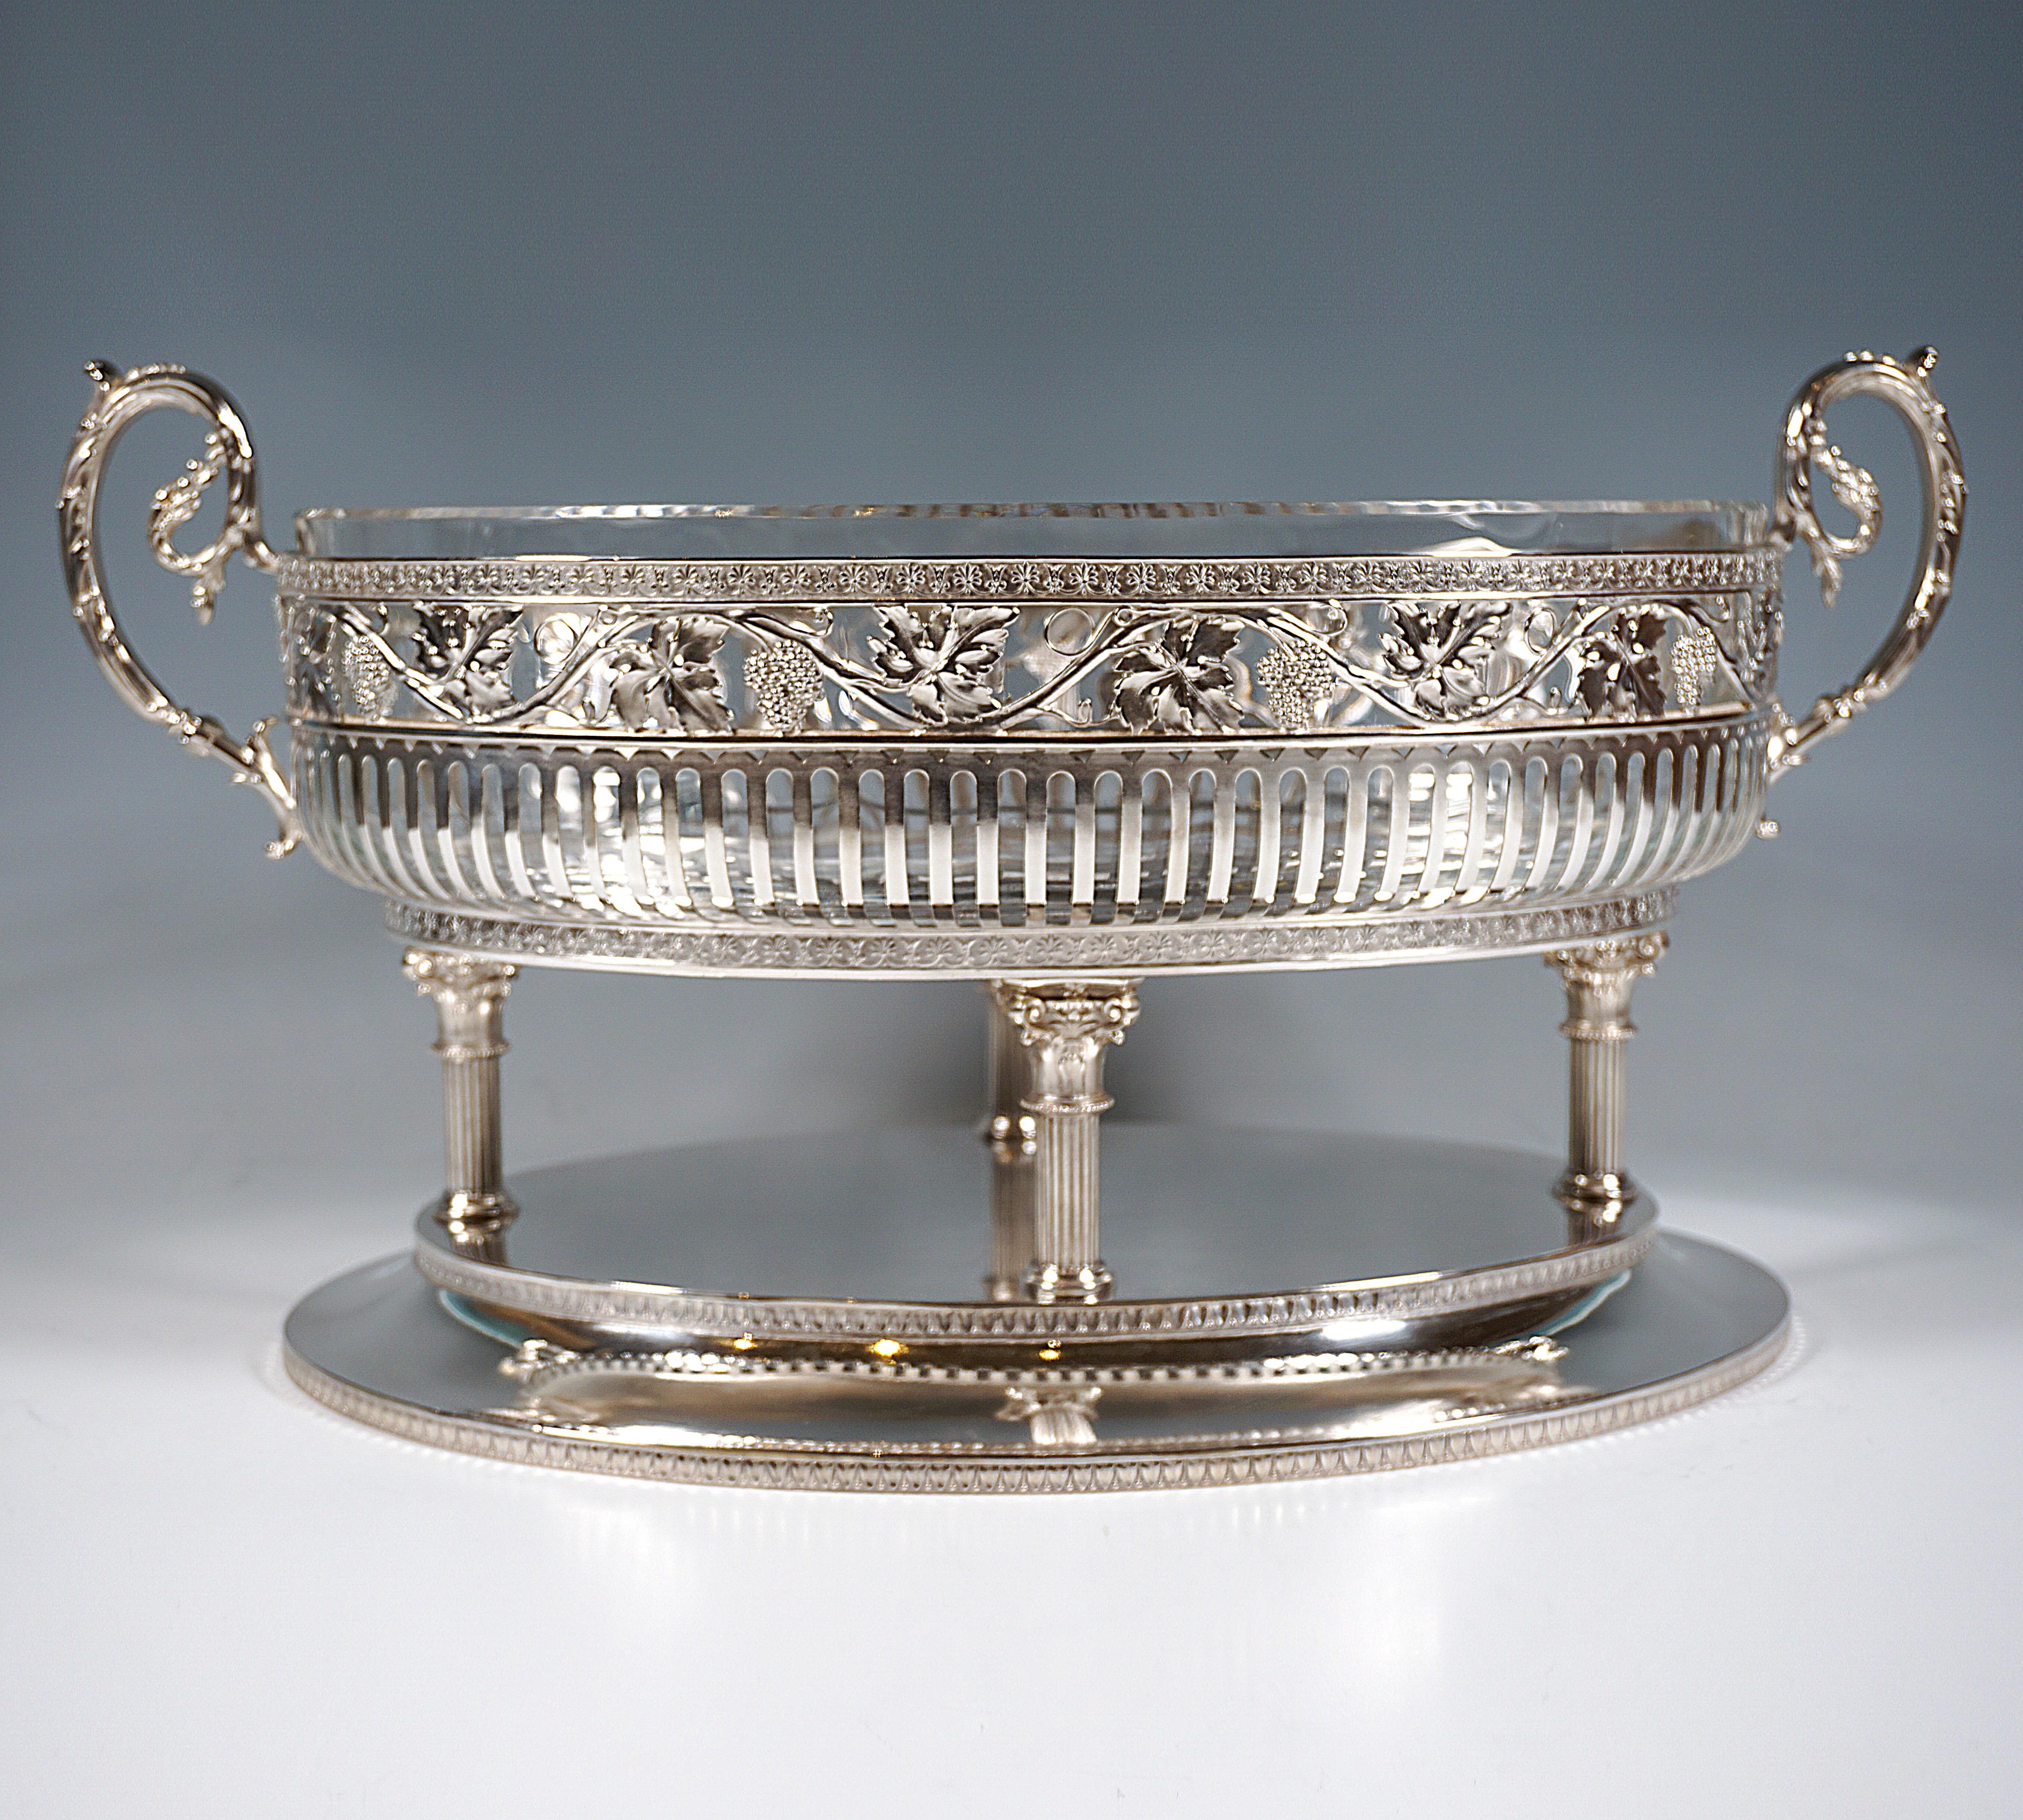 Representative elegant silver jardinière on oval, fluted stepped base, bordered by palmette bands, on top arranged in a lozenge four slender, fluted columns with Corinthian-like fancy capitals, crowned by a projecting oval bowl, the lower part is